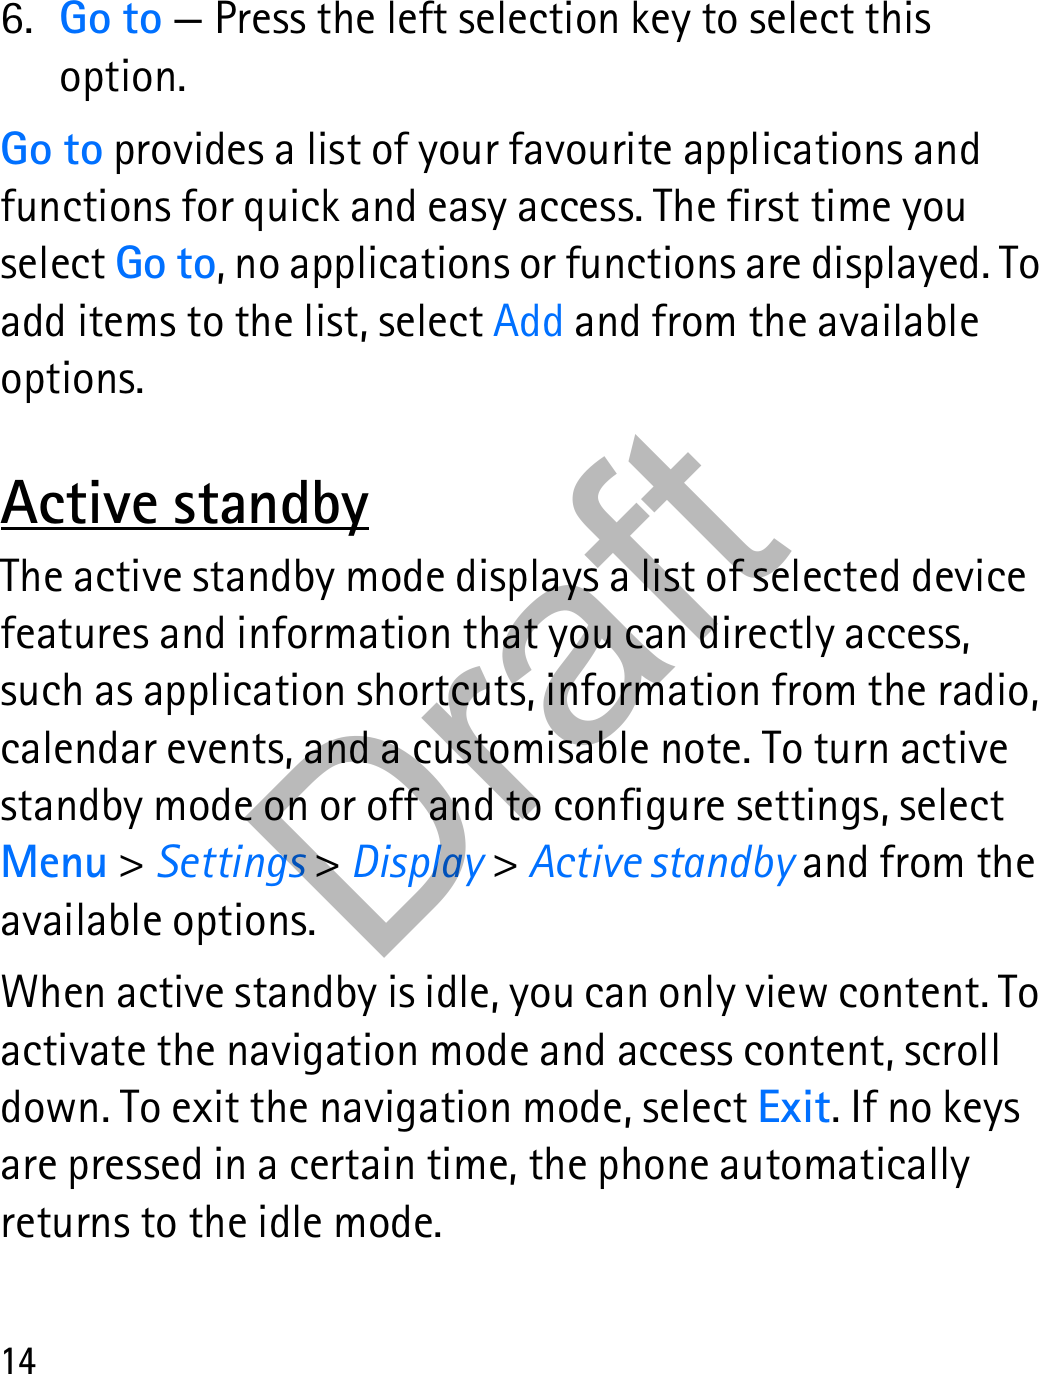 146. Go to — Press the left selection key to select this option.Go to provides a list of your favourite applications and functions for quick and easy access. The first time you select Go to, no applications or functions are displayed. To add items to the list, select Add and from the available options.Active standbyThe active standby mode displays a list of selected device features and information that you can directly access, such as application shortcuts, information from the radio, calendar events, and a customisable note. To turn active standby mode on or off and to configure settings, select Menu &gt; Settings &gt; Display &gt; Active standby and from the available options.When active standby is idle, you can only view content. To activate the navigation mode and access content, scroll down. To exit the navigation mode, select Exit. If no keys are pressed in a certain time, the phone automatically returns to the idle mode.Draft